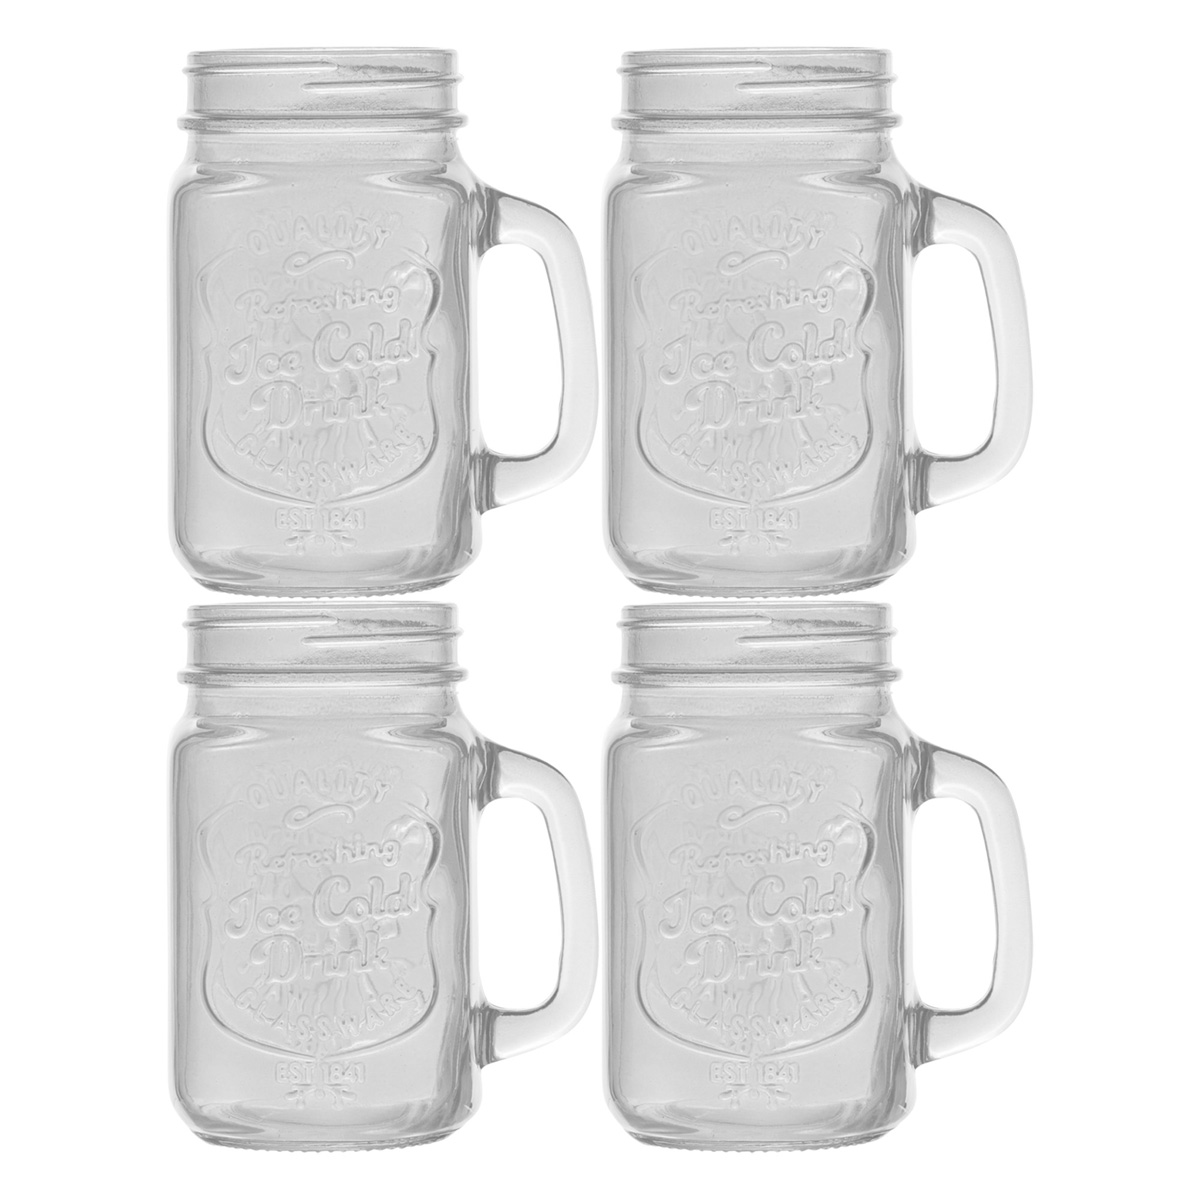 Home Essentials 15.25oz. Ice Cold Clear Glass Mugs - Set Of 4